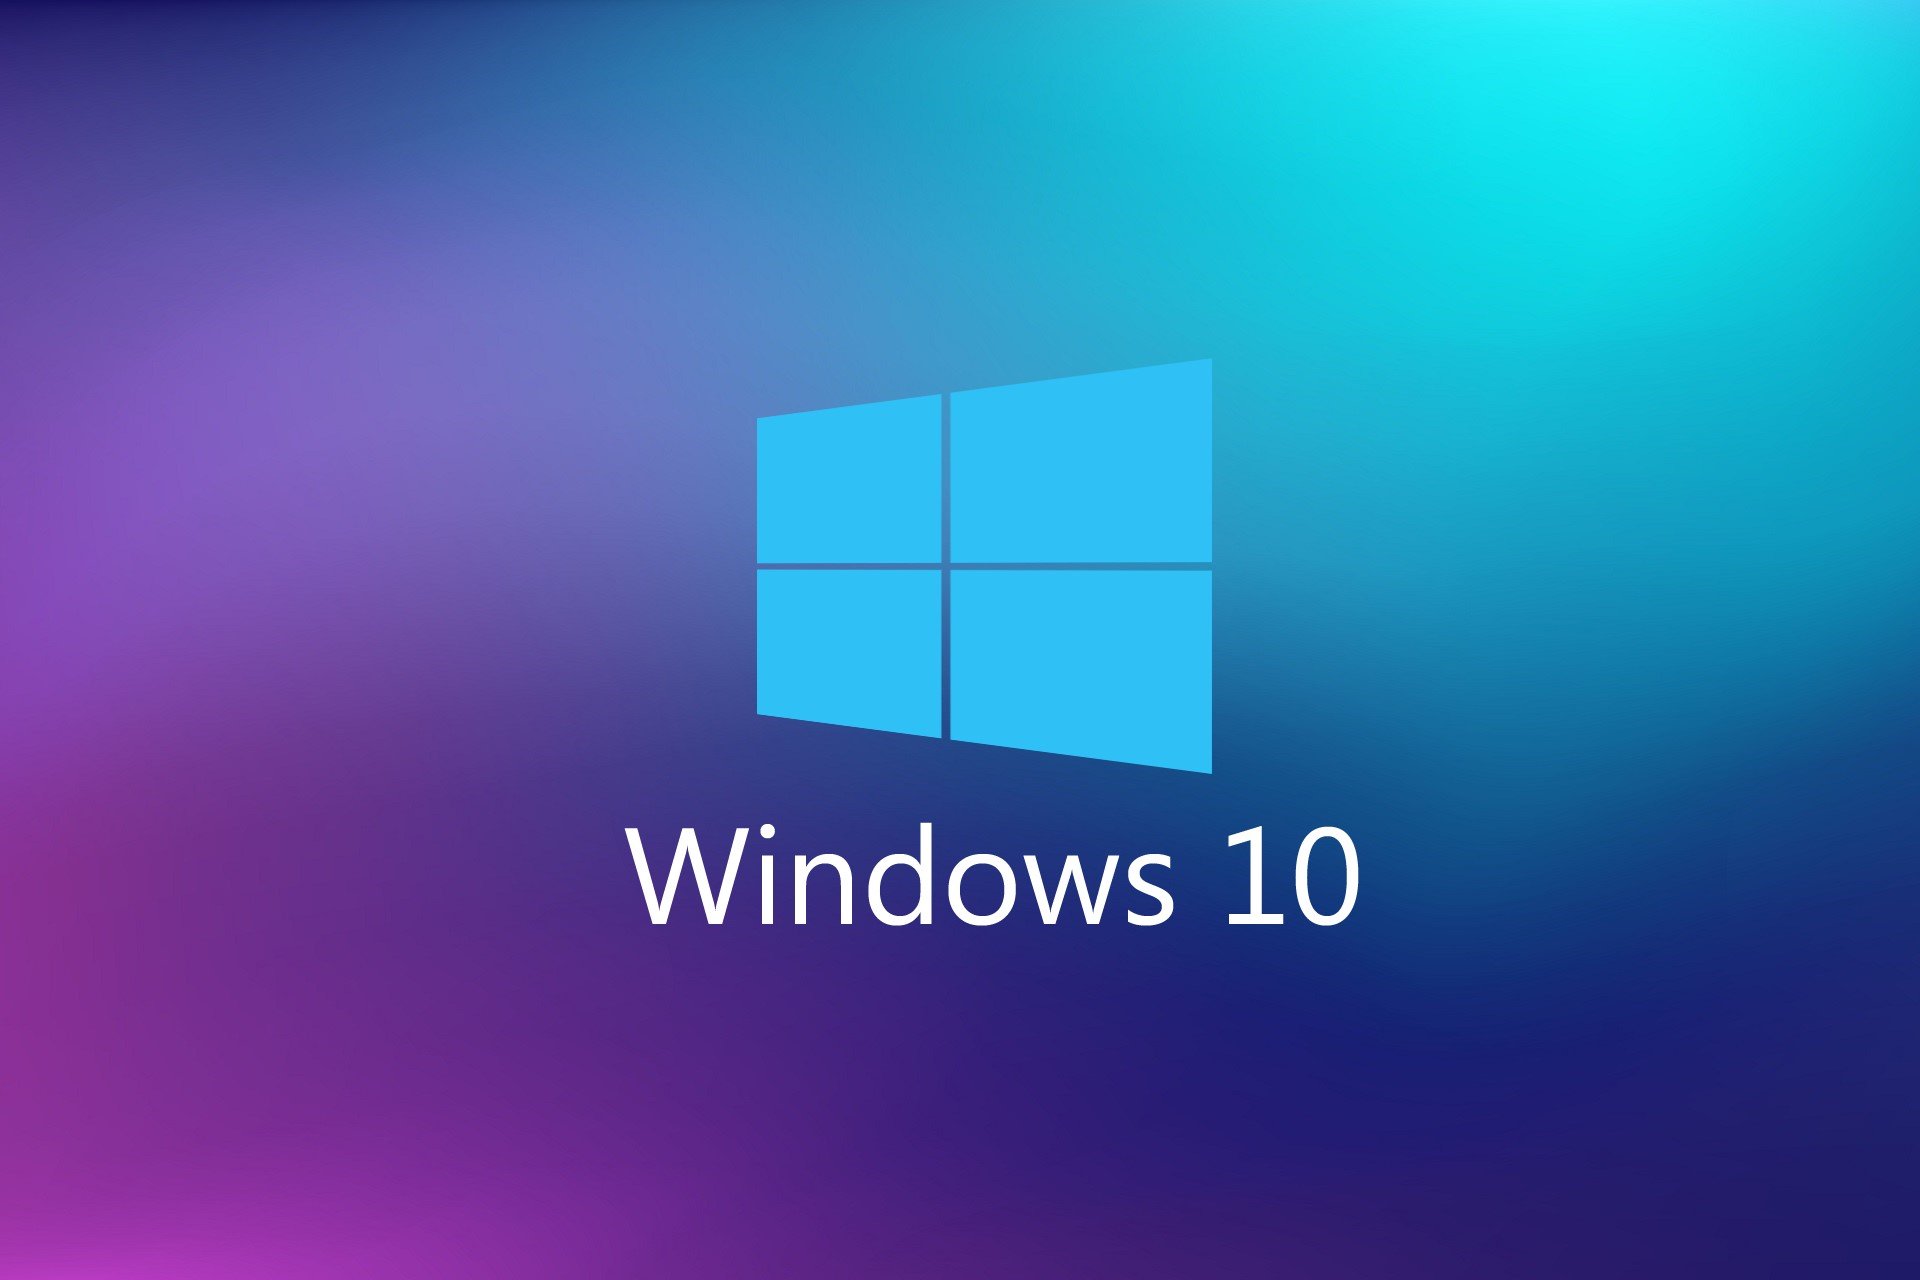 How to dual boot Windows 10 and Ubuntu or another OS